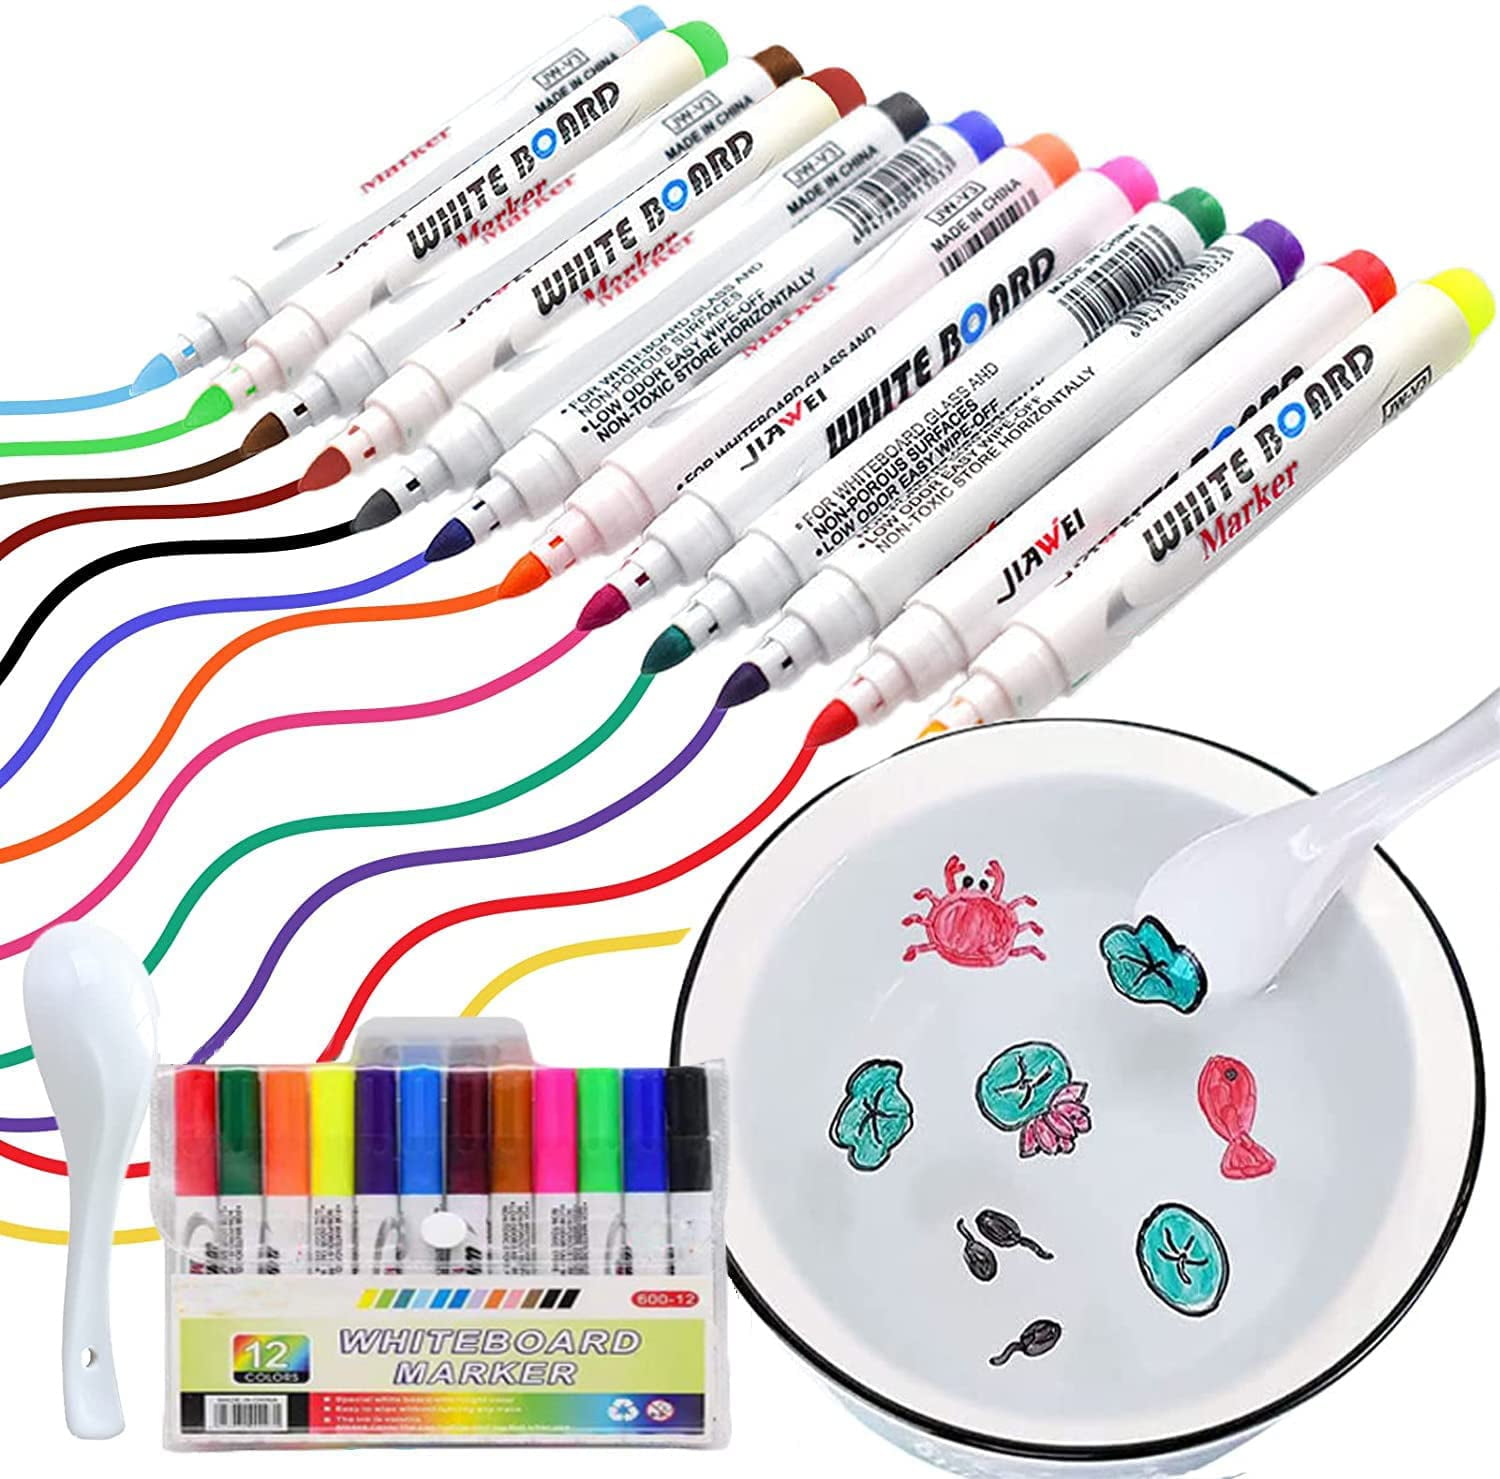 Yuliyaya Dry Erase Markers, Washable Markers for Kids, Fine Tip Whiteboard  Markers, 12 Pack Magic Water Painting Pens, Floating Ink Drawings, Graffiti